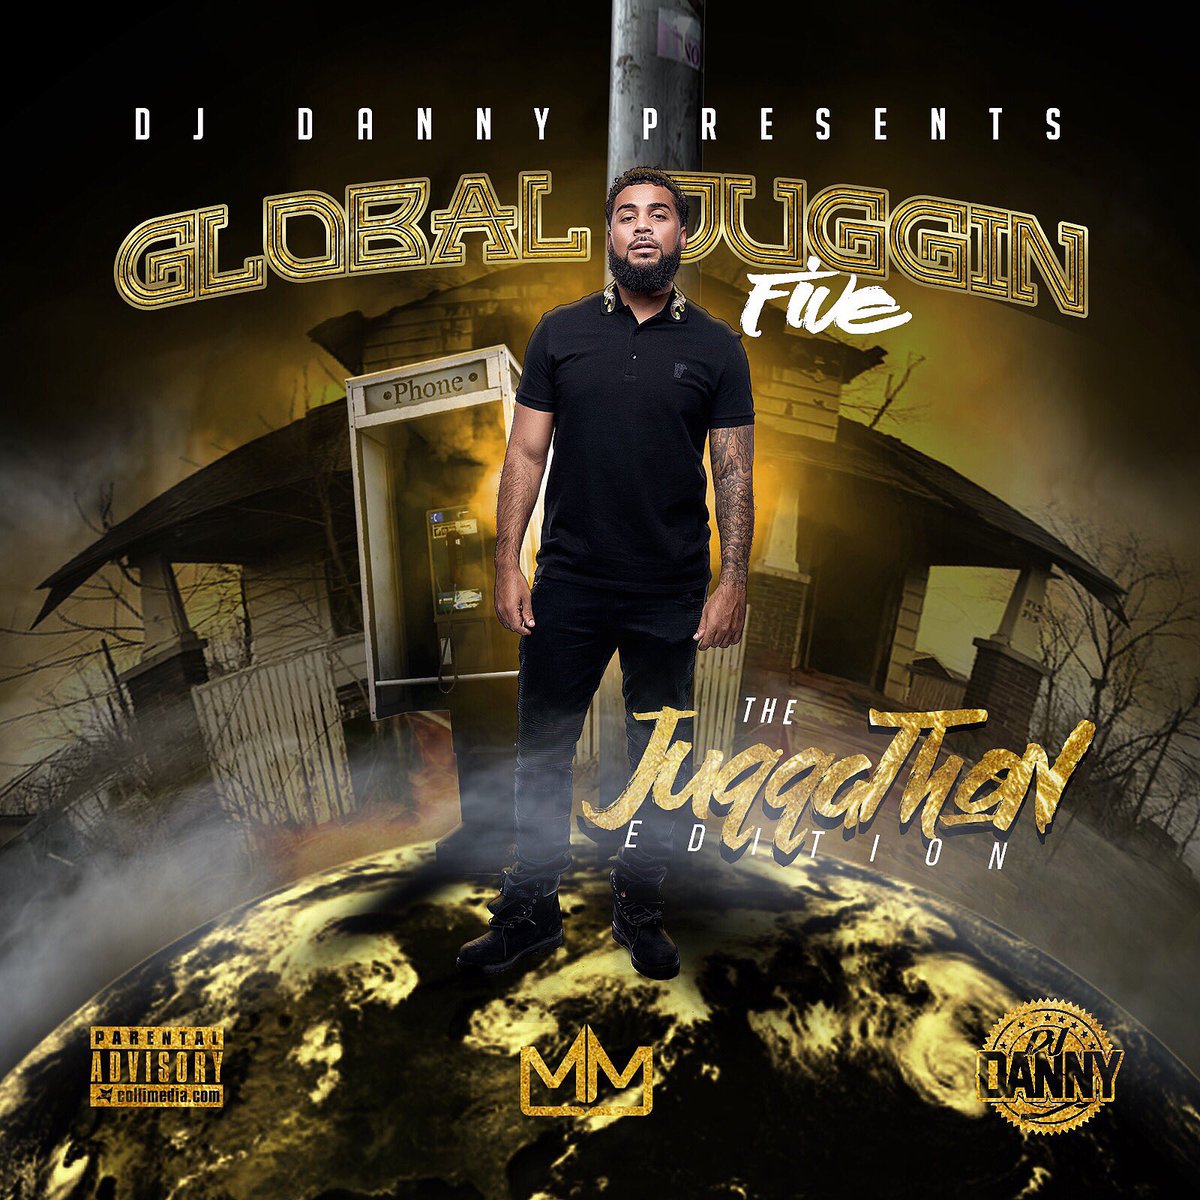 DJ Danny introduces the world to Global Juggin’ 5